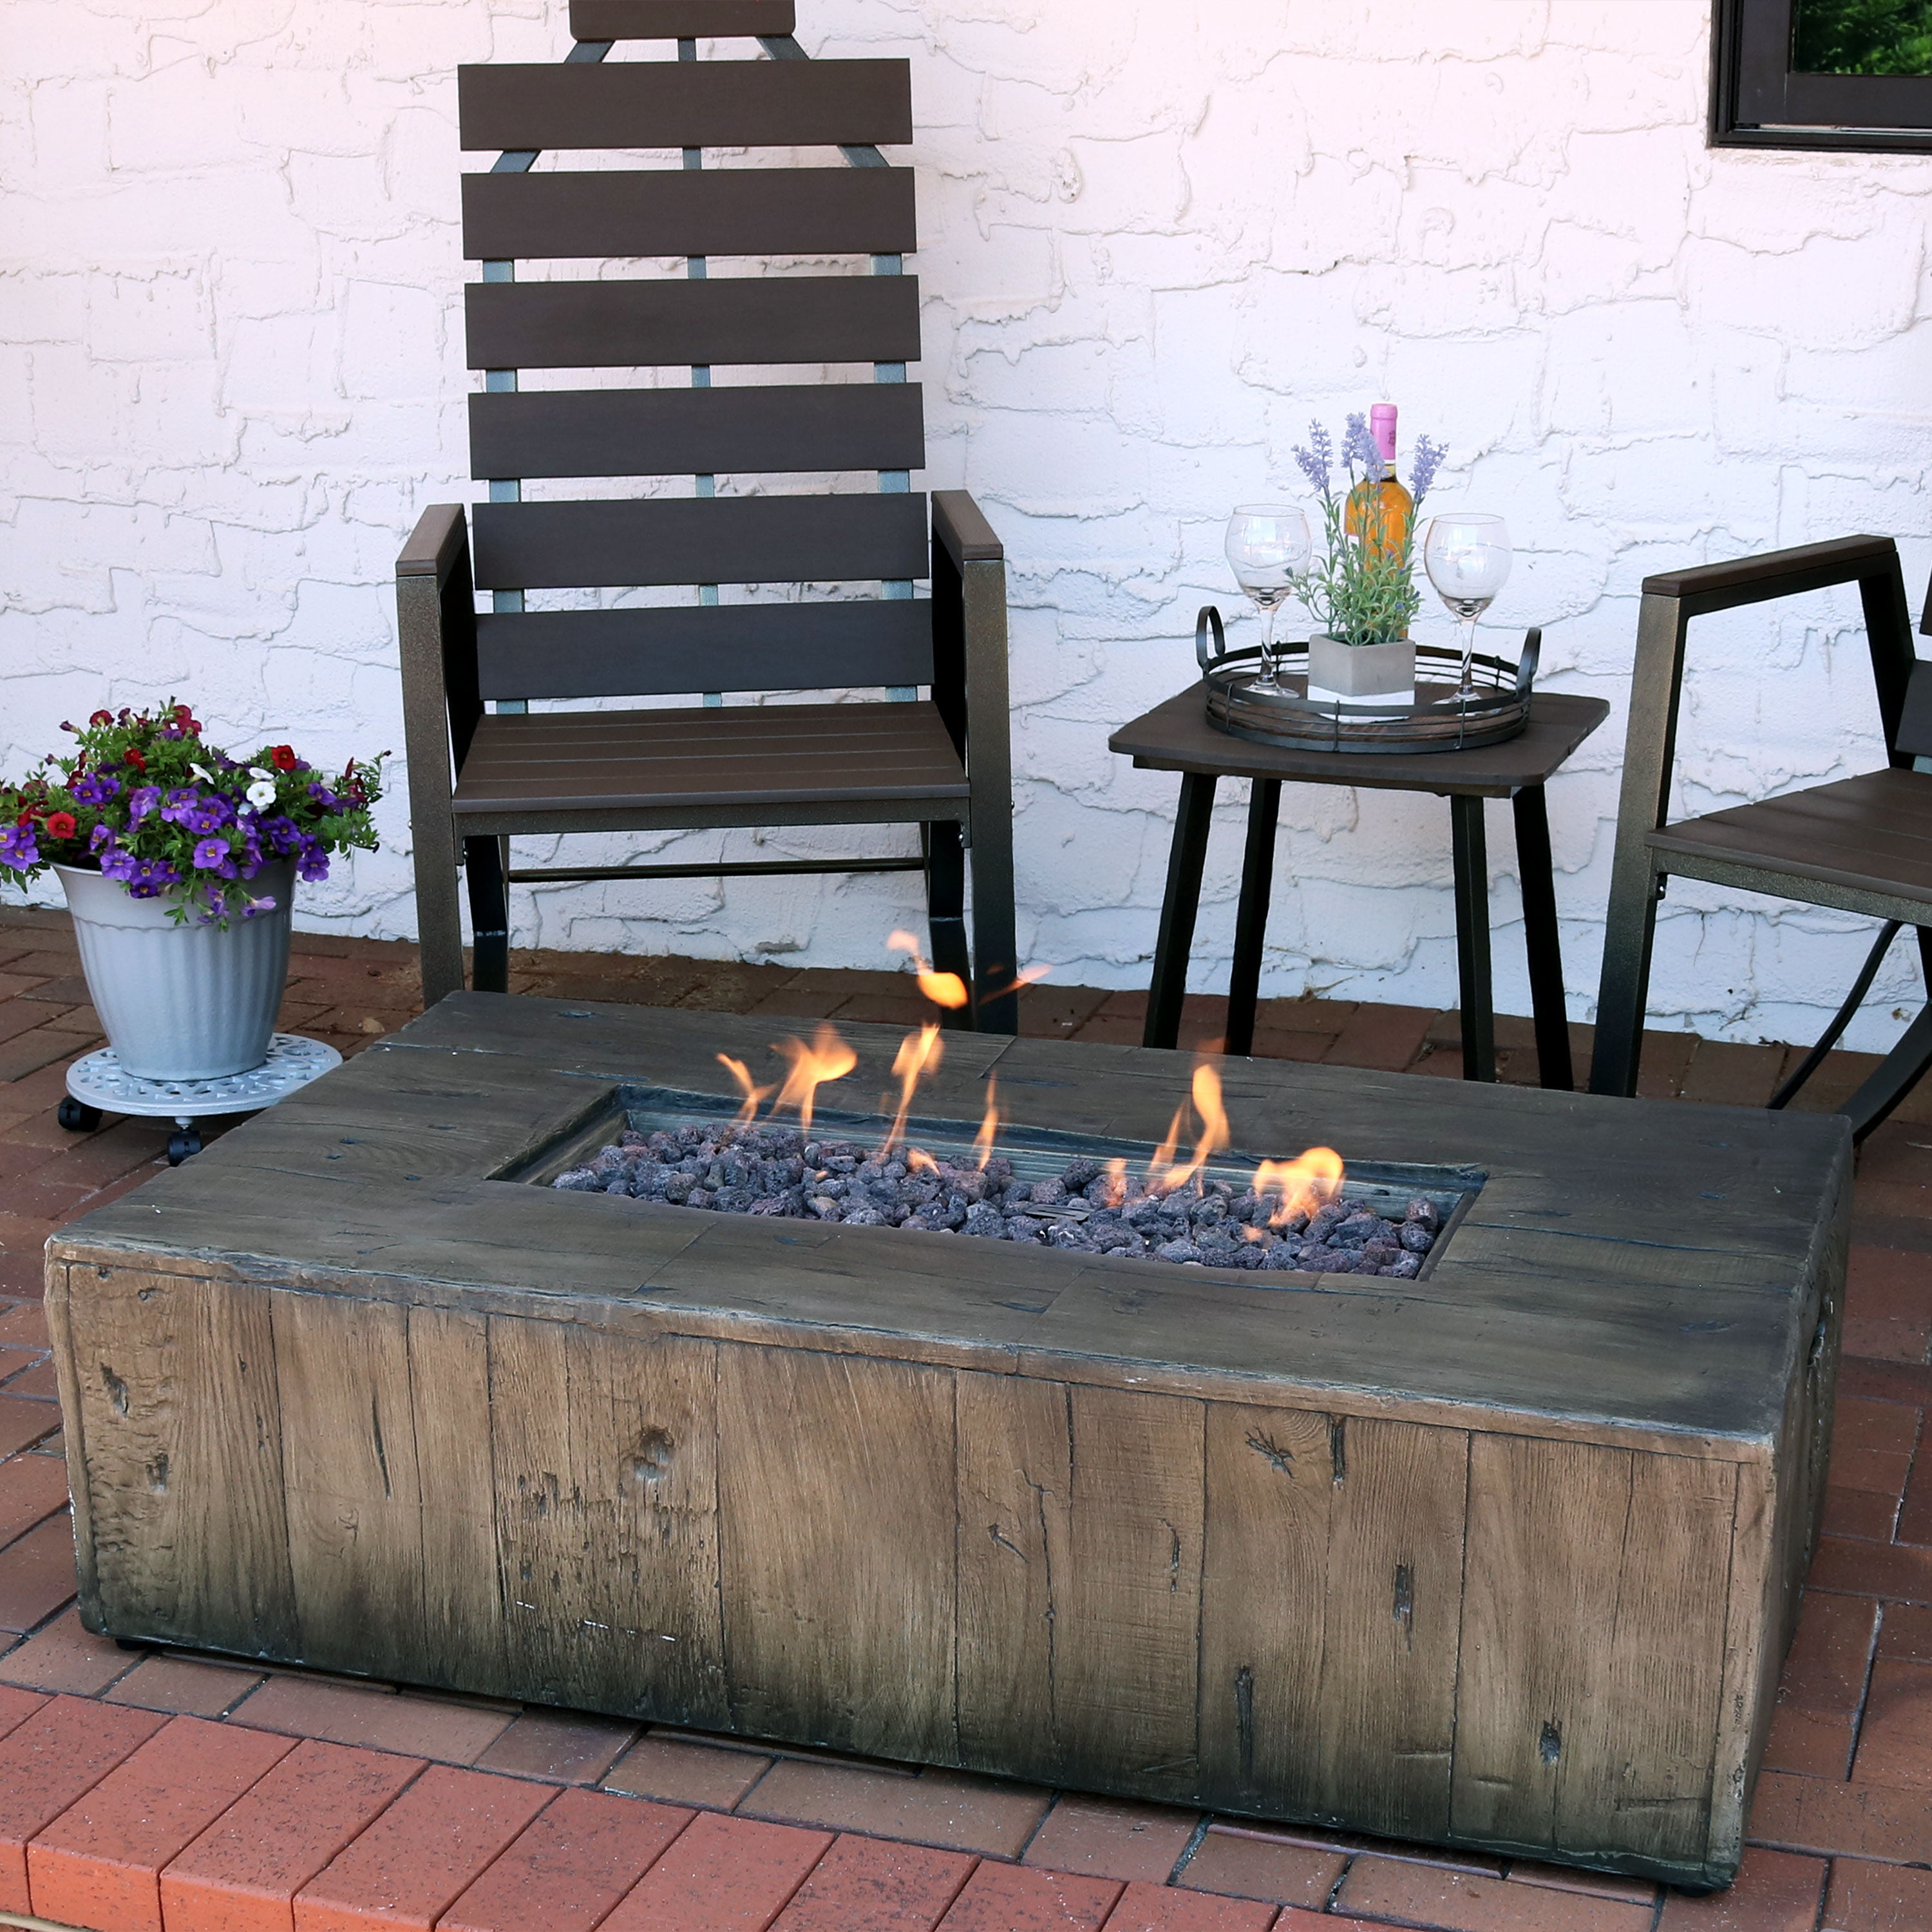 Sunnydaze Rustic Propane Gas Fire Pit Table With Outdoor Weather Resistant Durable Cover And Lava Rocks Faux Wood Patio Fire Table 48 Inch Walmart Com